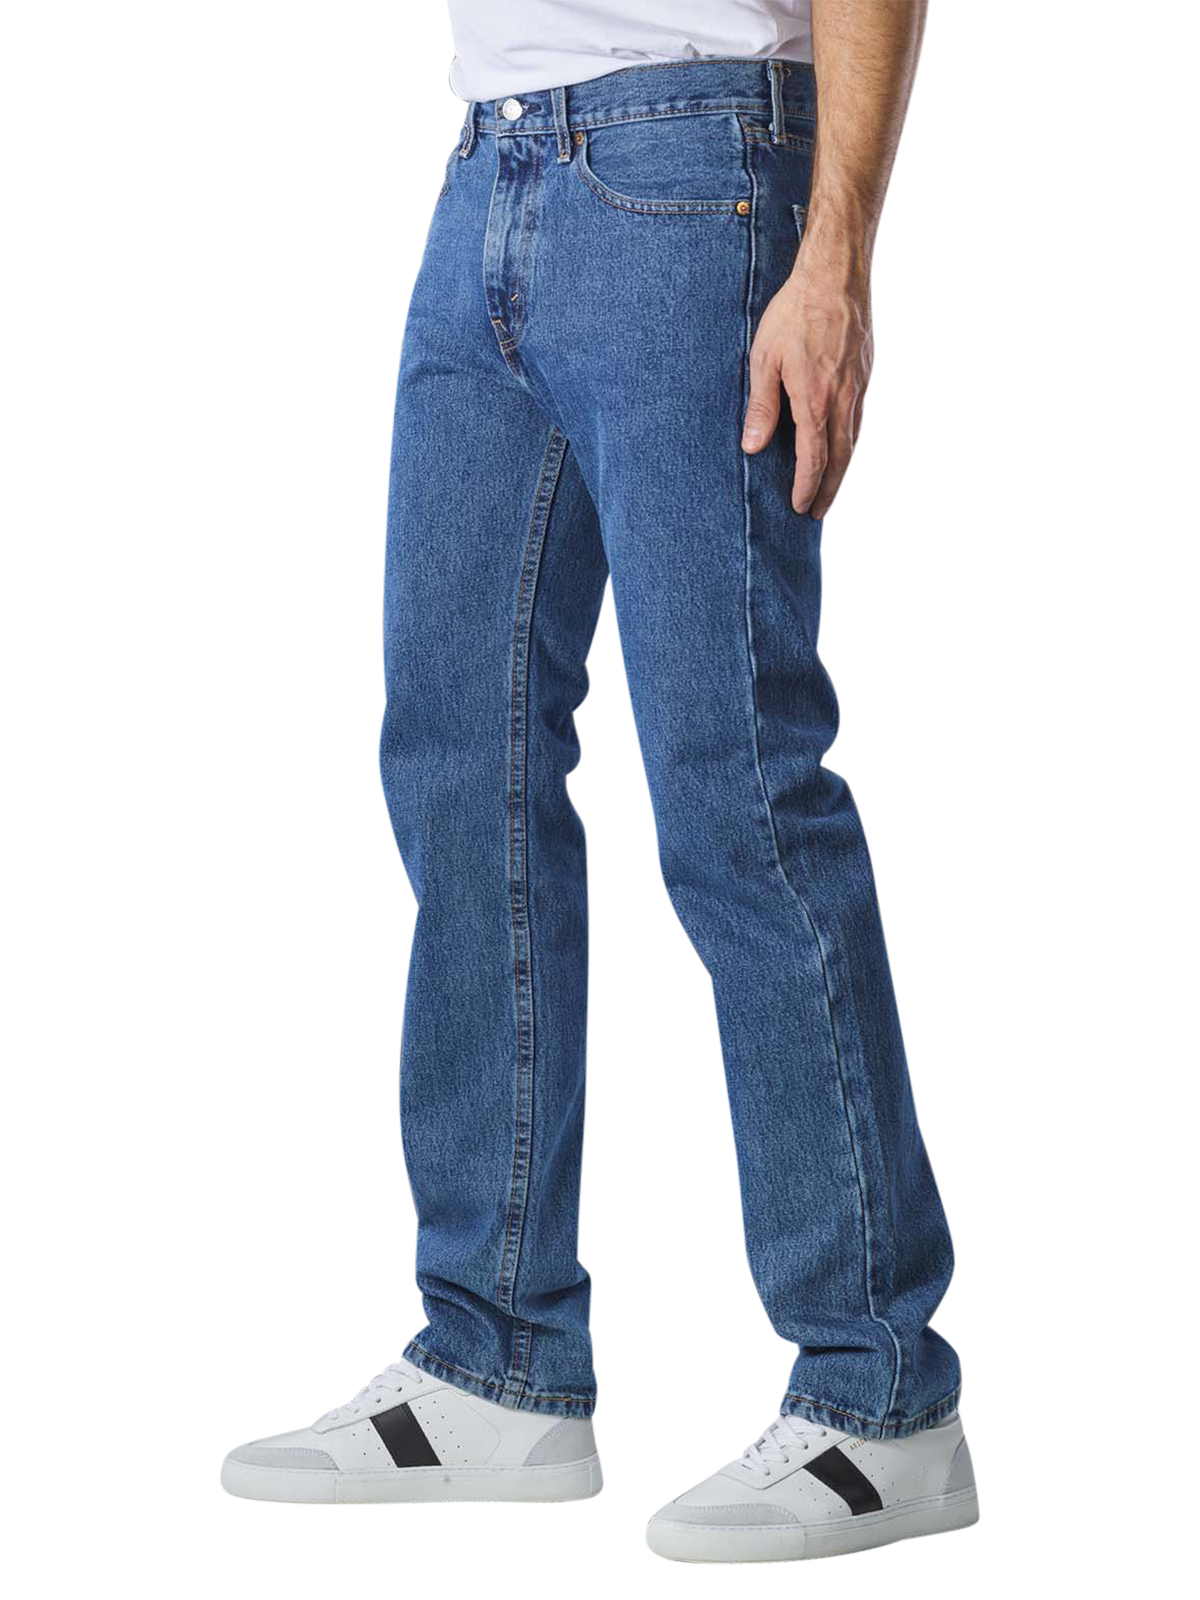 Levi's 505 Jeans Straight Fit stonewash 3-Pack Levi's Men's Jeans | Free  Shipping on  - SIMPLY LOOK GOOD